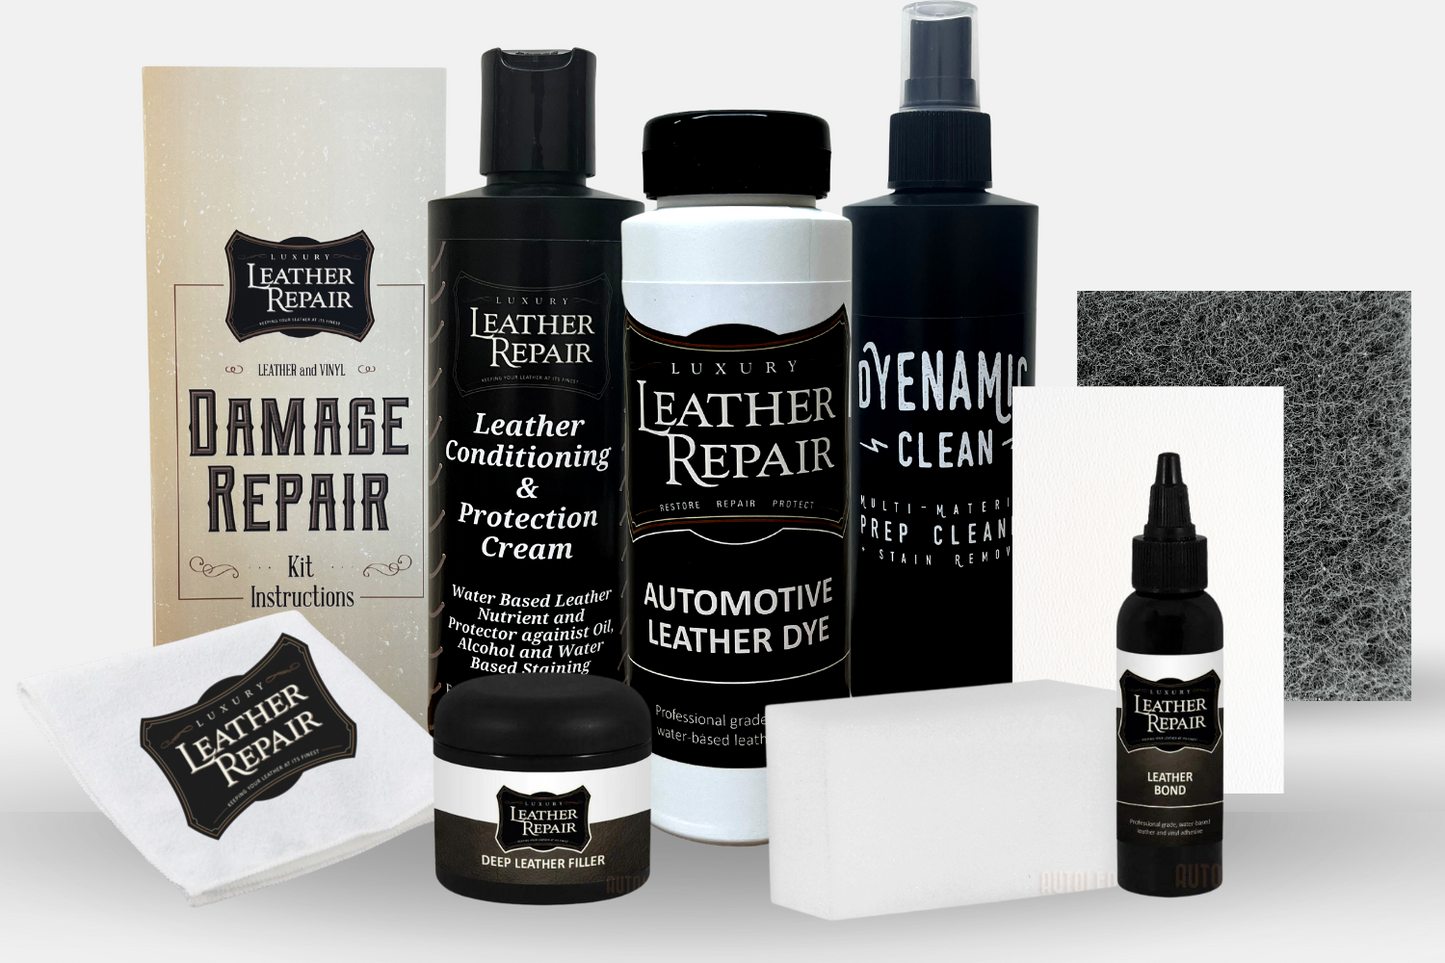 Leather Master 250ML LEATHER CARE KIT - Cleaning Kit Contains The Cleaner,  Conditioner, Sponge, And Products For All Leather Car Interior And